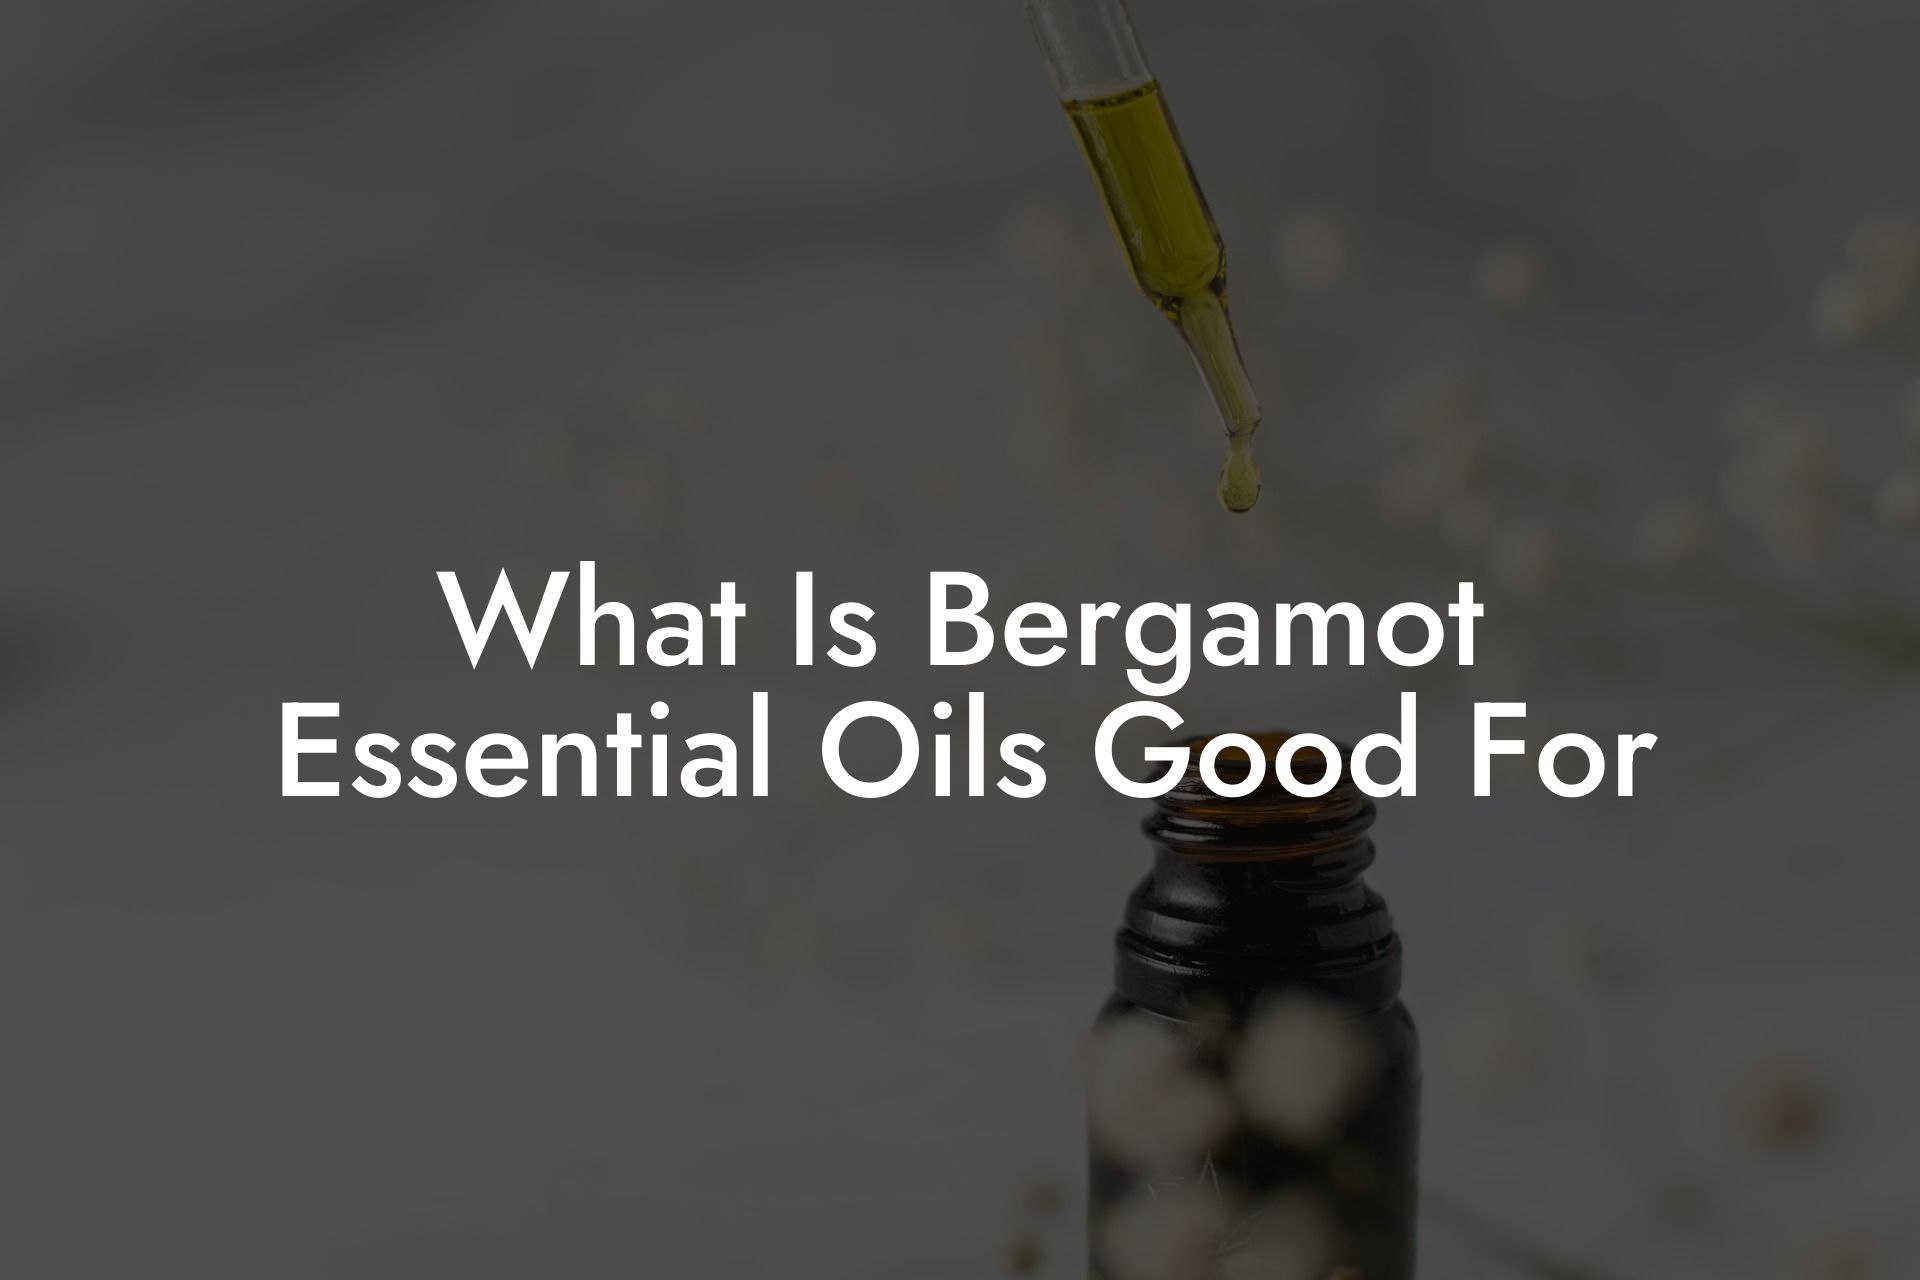 What Is Bergamot Essential Oils Good For